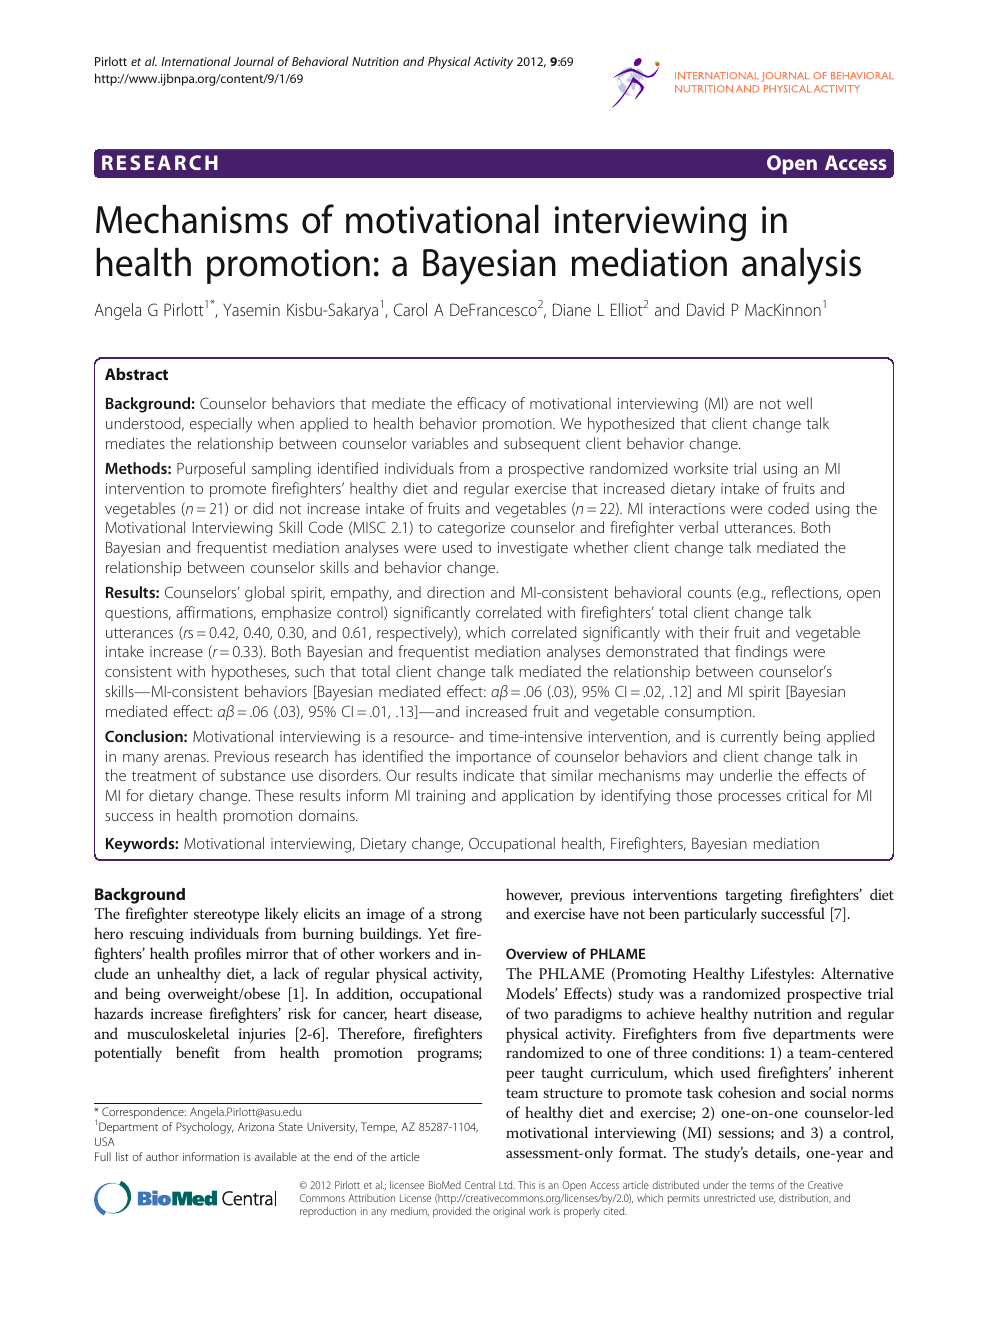 Mechanisms Of Motivational Interviewing In Health Promotion A Bayesian Mediation Analysis Topic Of Research Paper In Psychology Download Scholarly Article Pdf And Read For Free On Cyberleninka Open Science Hub